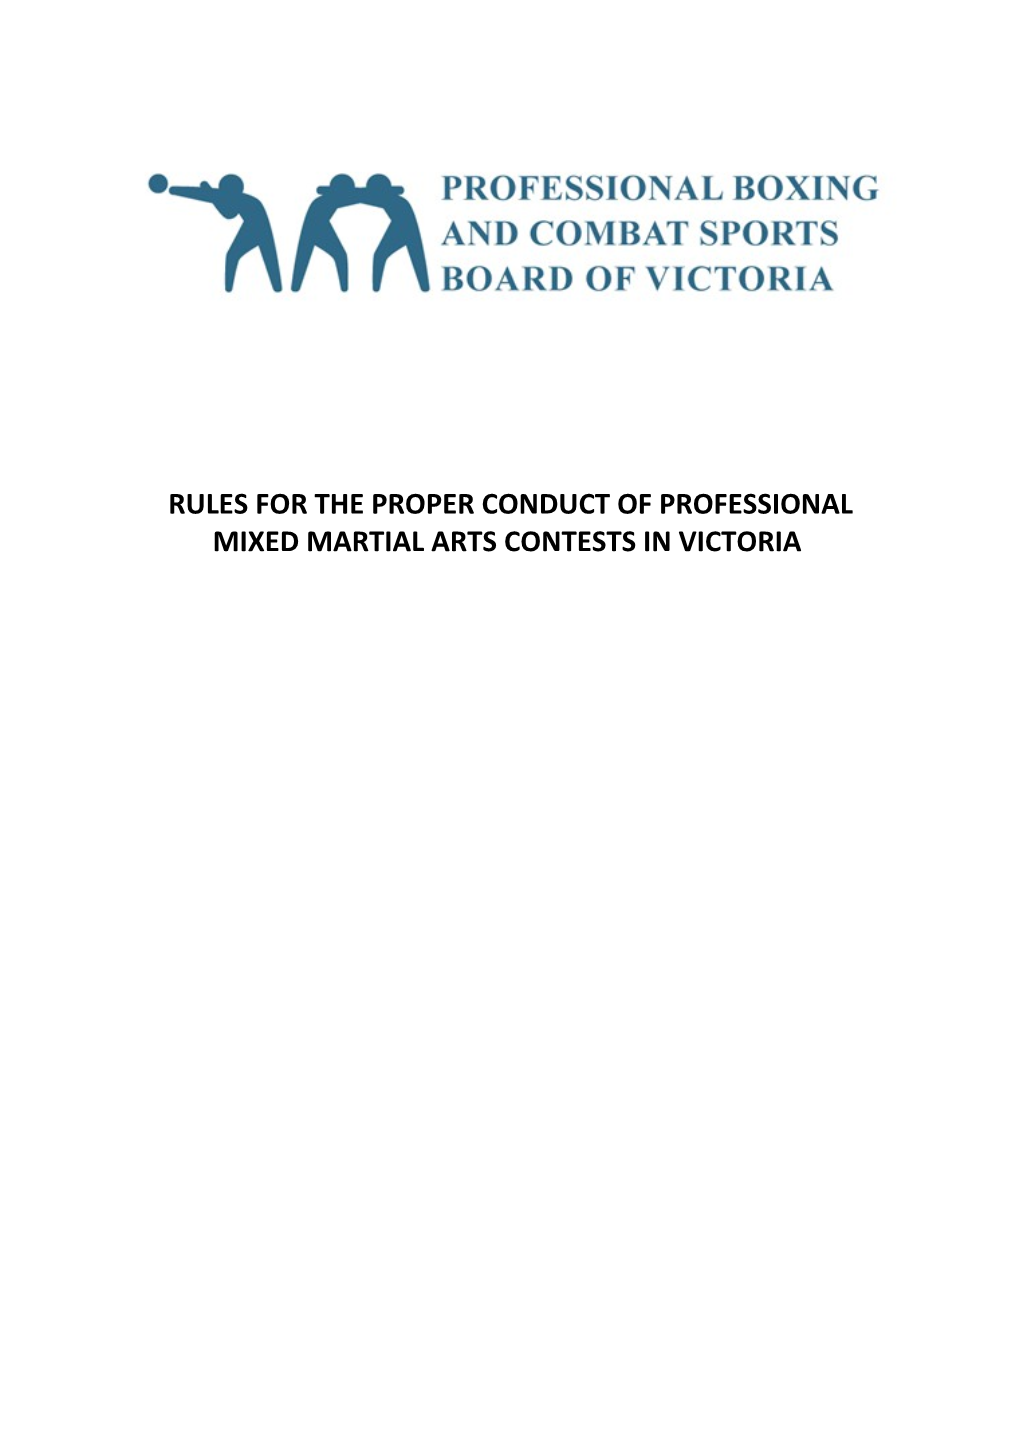 Rules for the Proper Conduct of Professional Mixed Martial Arts Contests in Victoria